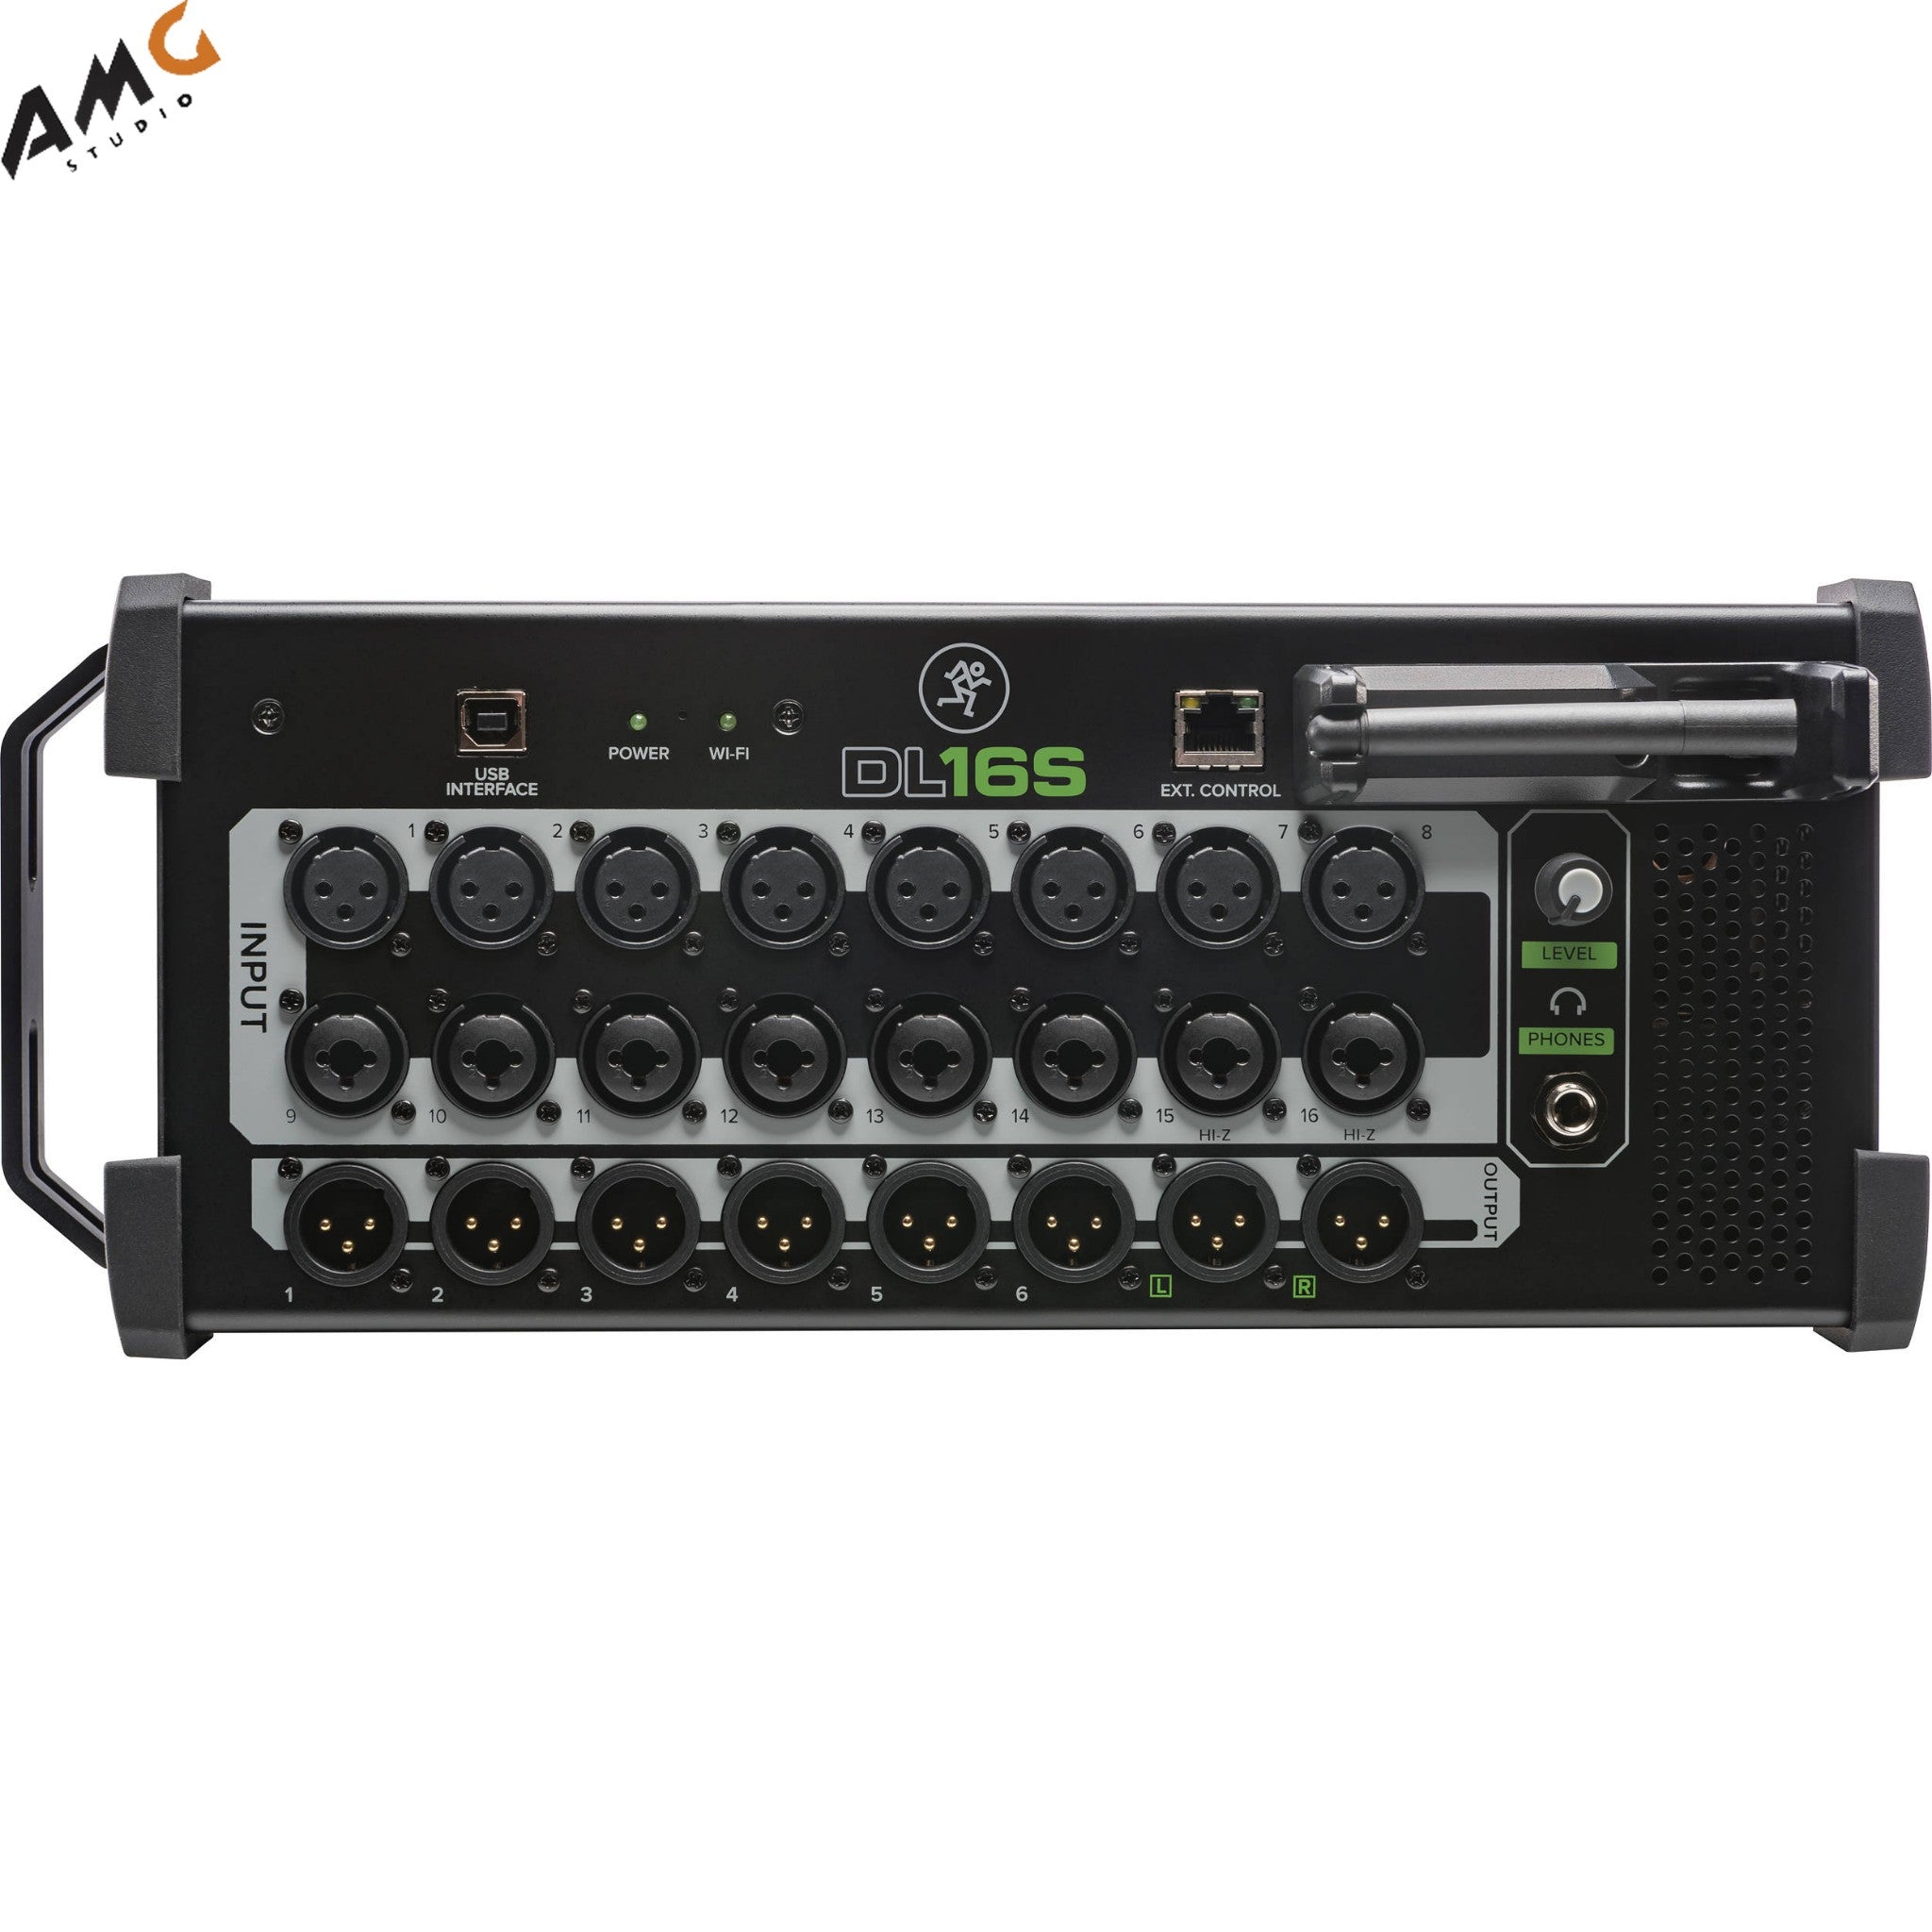 Mackie DL16S 16-Channel Wireless Digital Live Sound Mixer with Built-In Wi-Fi - Studio AMG